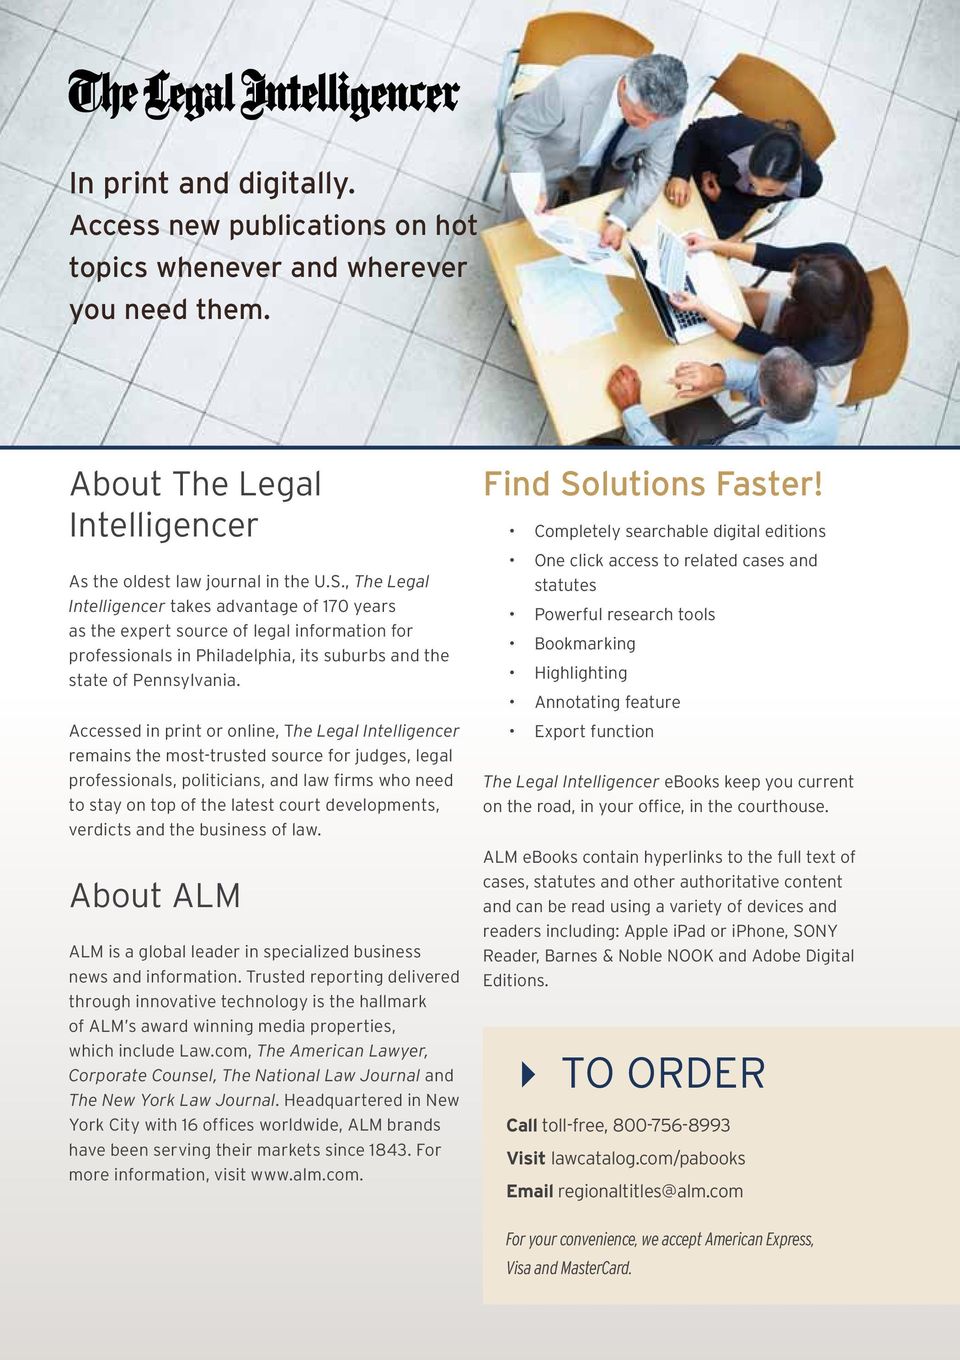 Accessed in print or online, The Legal Intelligencer remains the most-trusted source for judges, legal professionals, politicians, and law firms who need to stay on top of the latest court